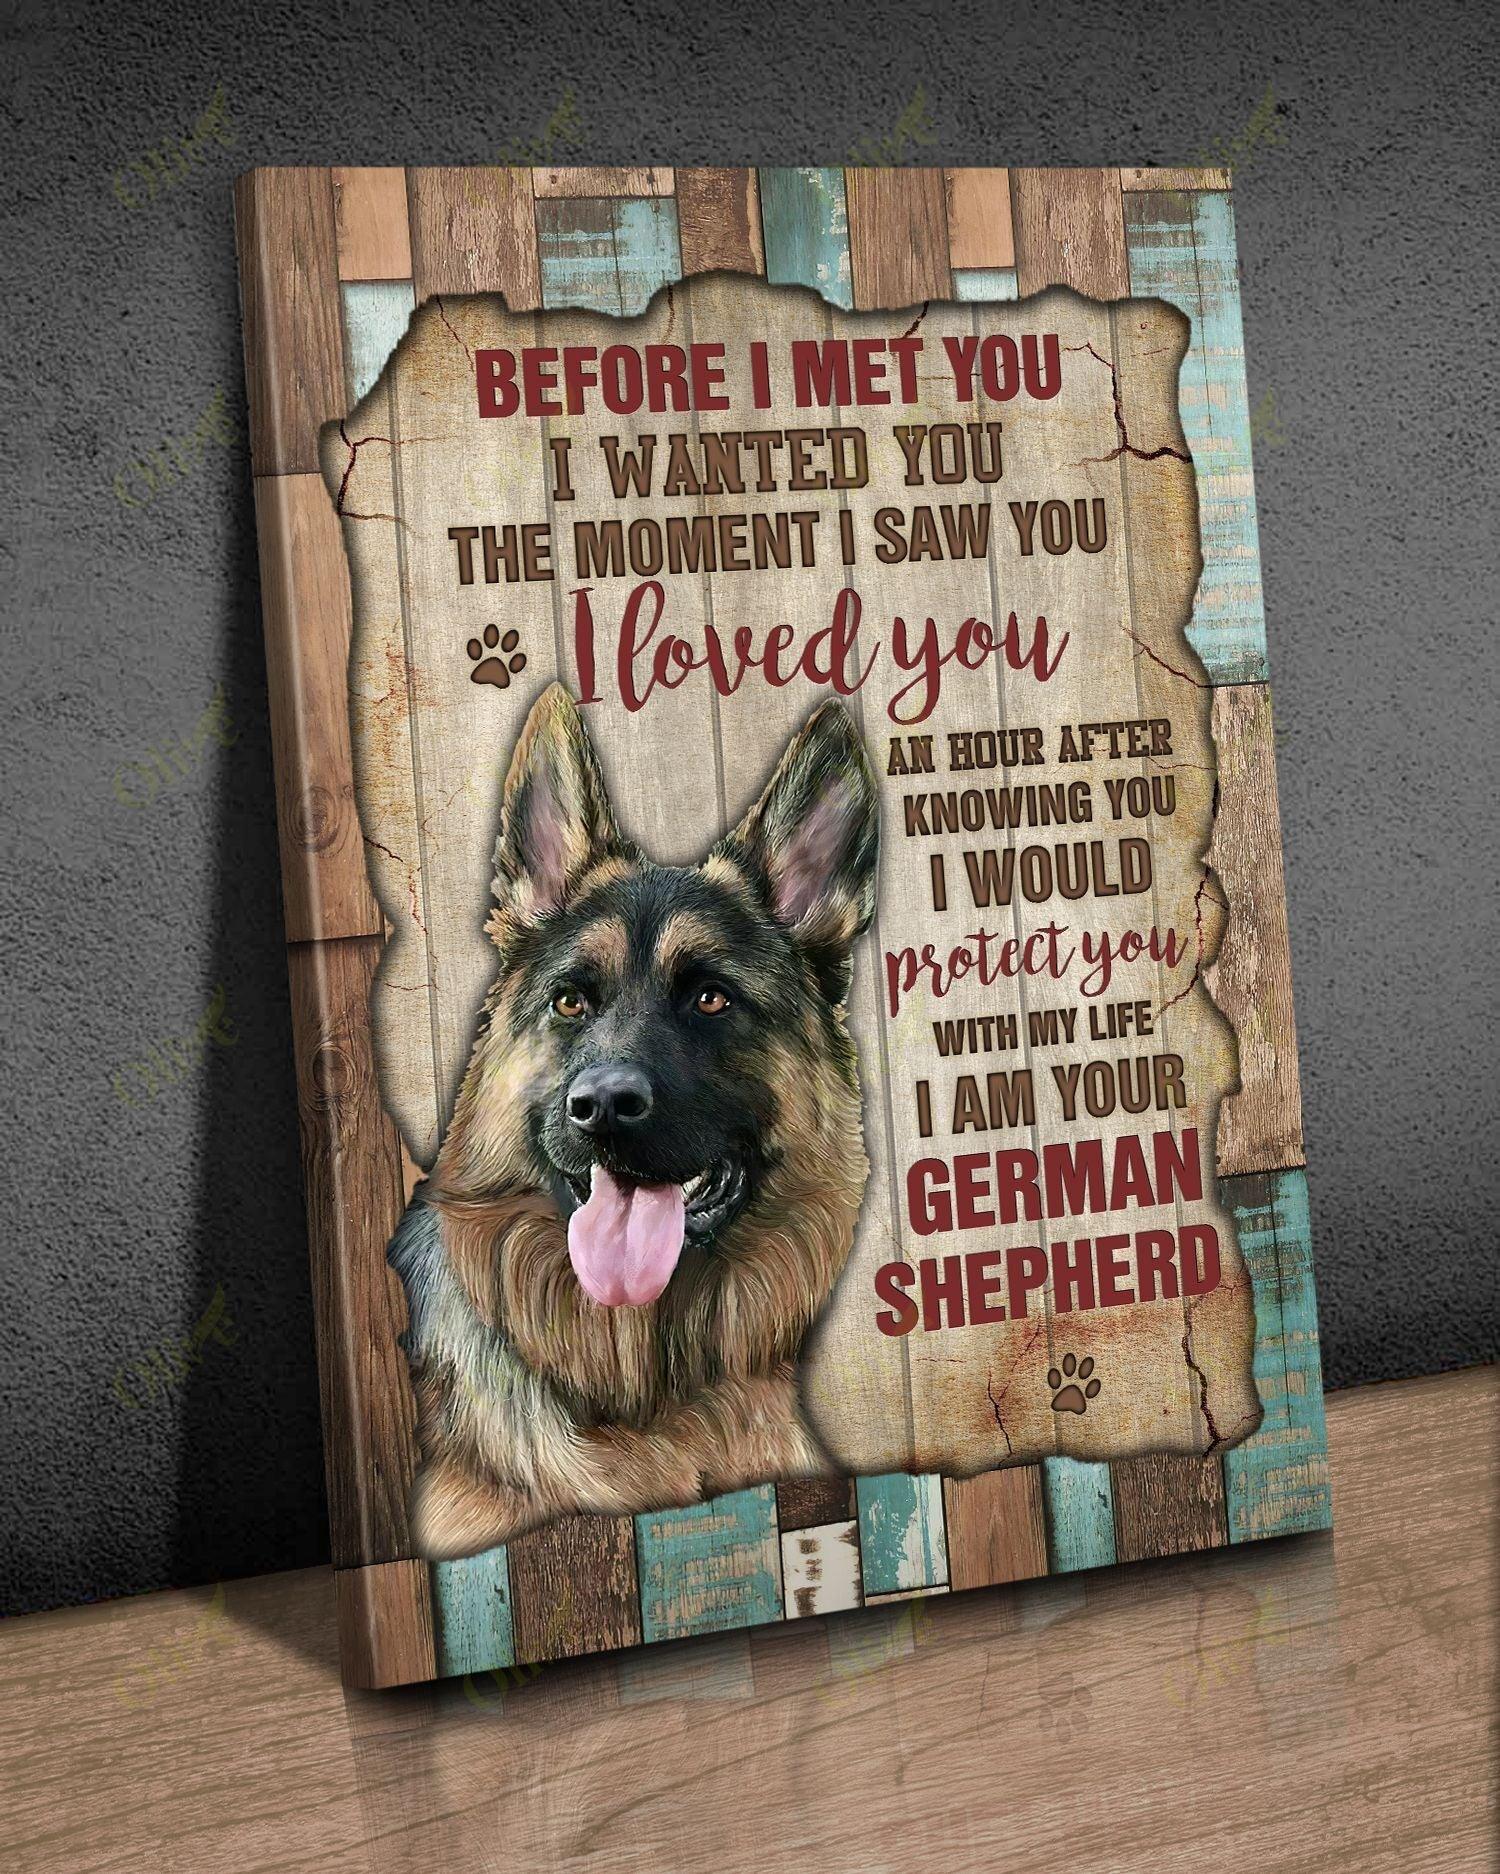 German Shepherd Landscape Canvas, Dog Canvas Wall Decor Visual Art For Dog Lovers, Before I Met You I Wanted You The Moment I Saw You Canvas - Amzanimalsgift